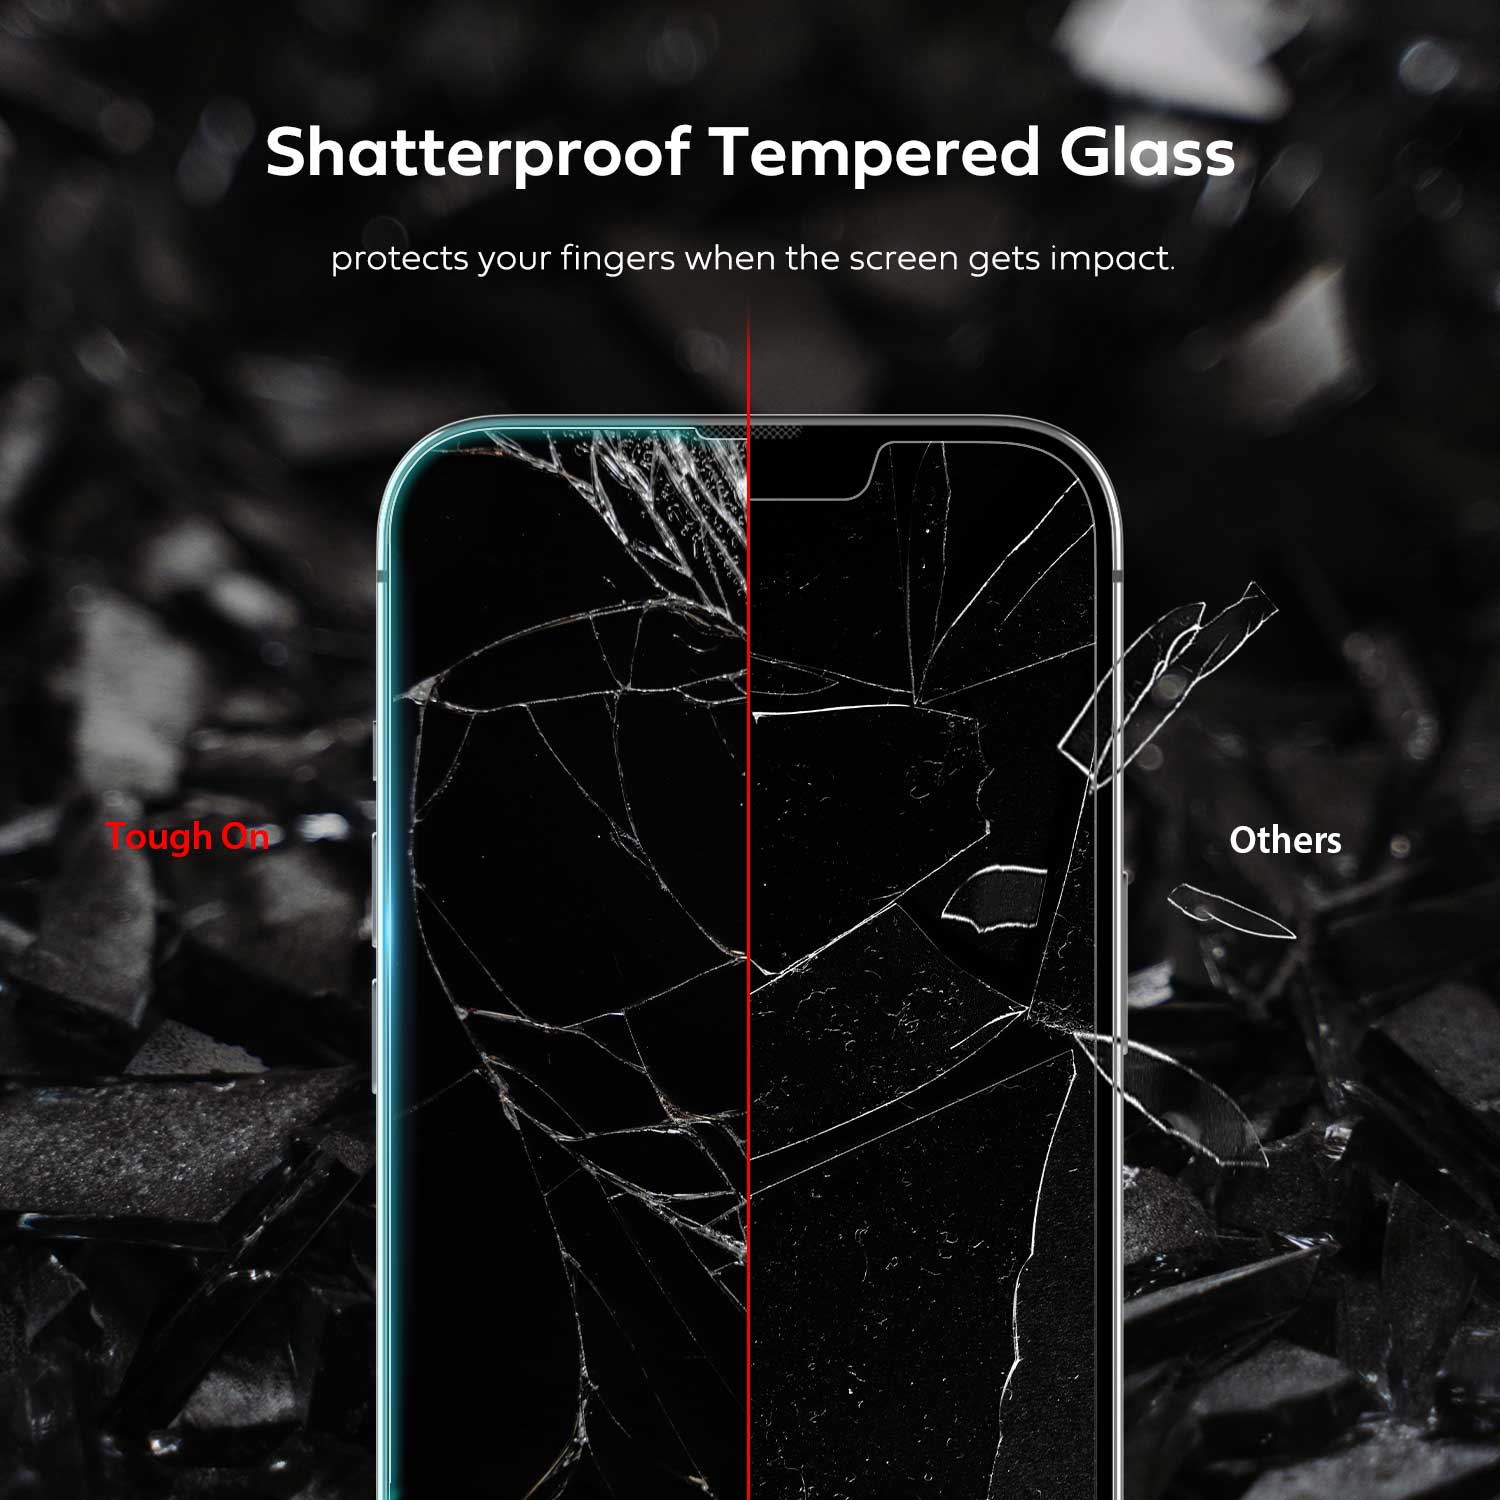 Tough On iPhone 13 Pro Max Tempered Glass Screen Protector 2 Pack w/ Installation Kit